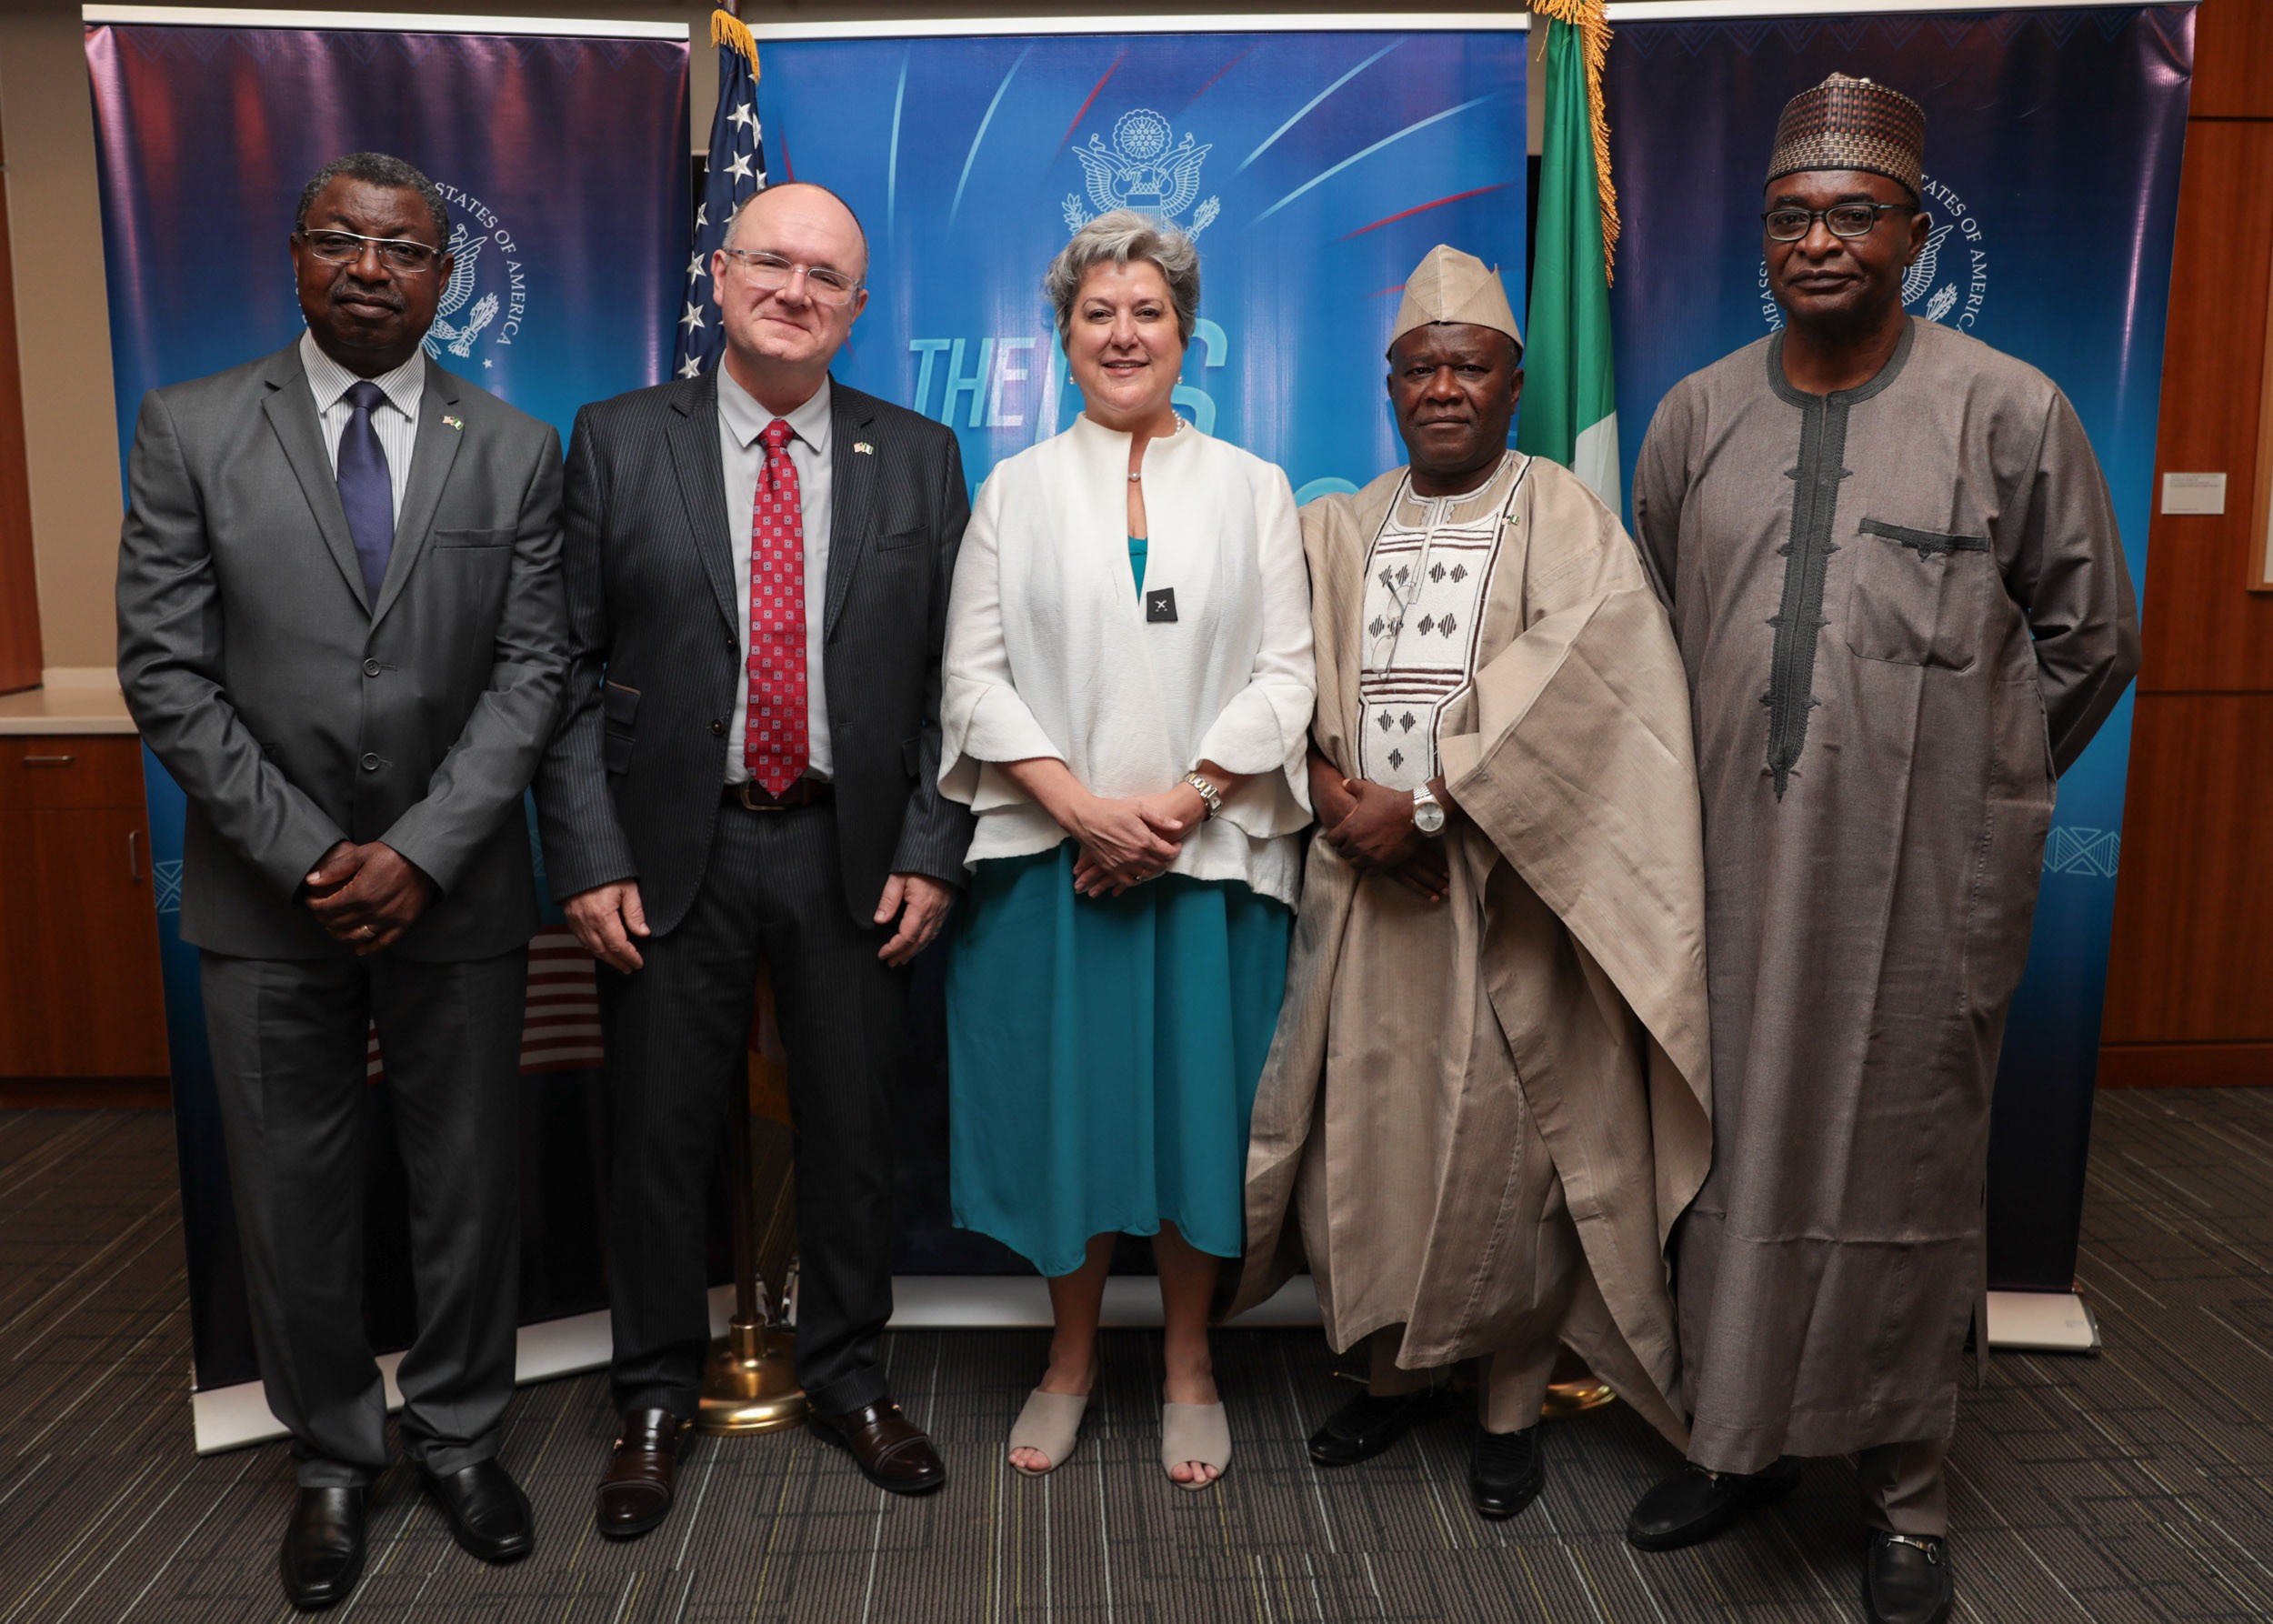 U.S Mission in Nigeria Awards Grant for Preservation of Nigerian Cultural Monument